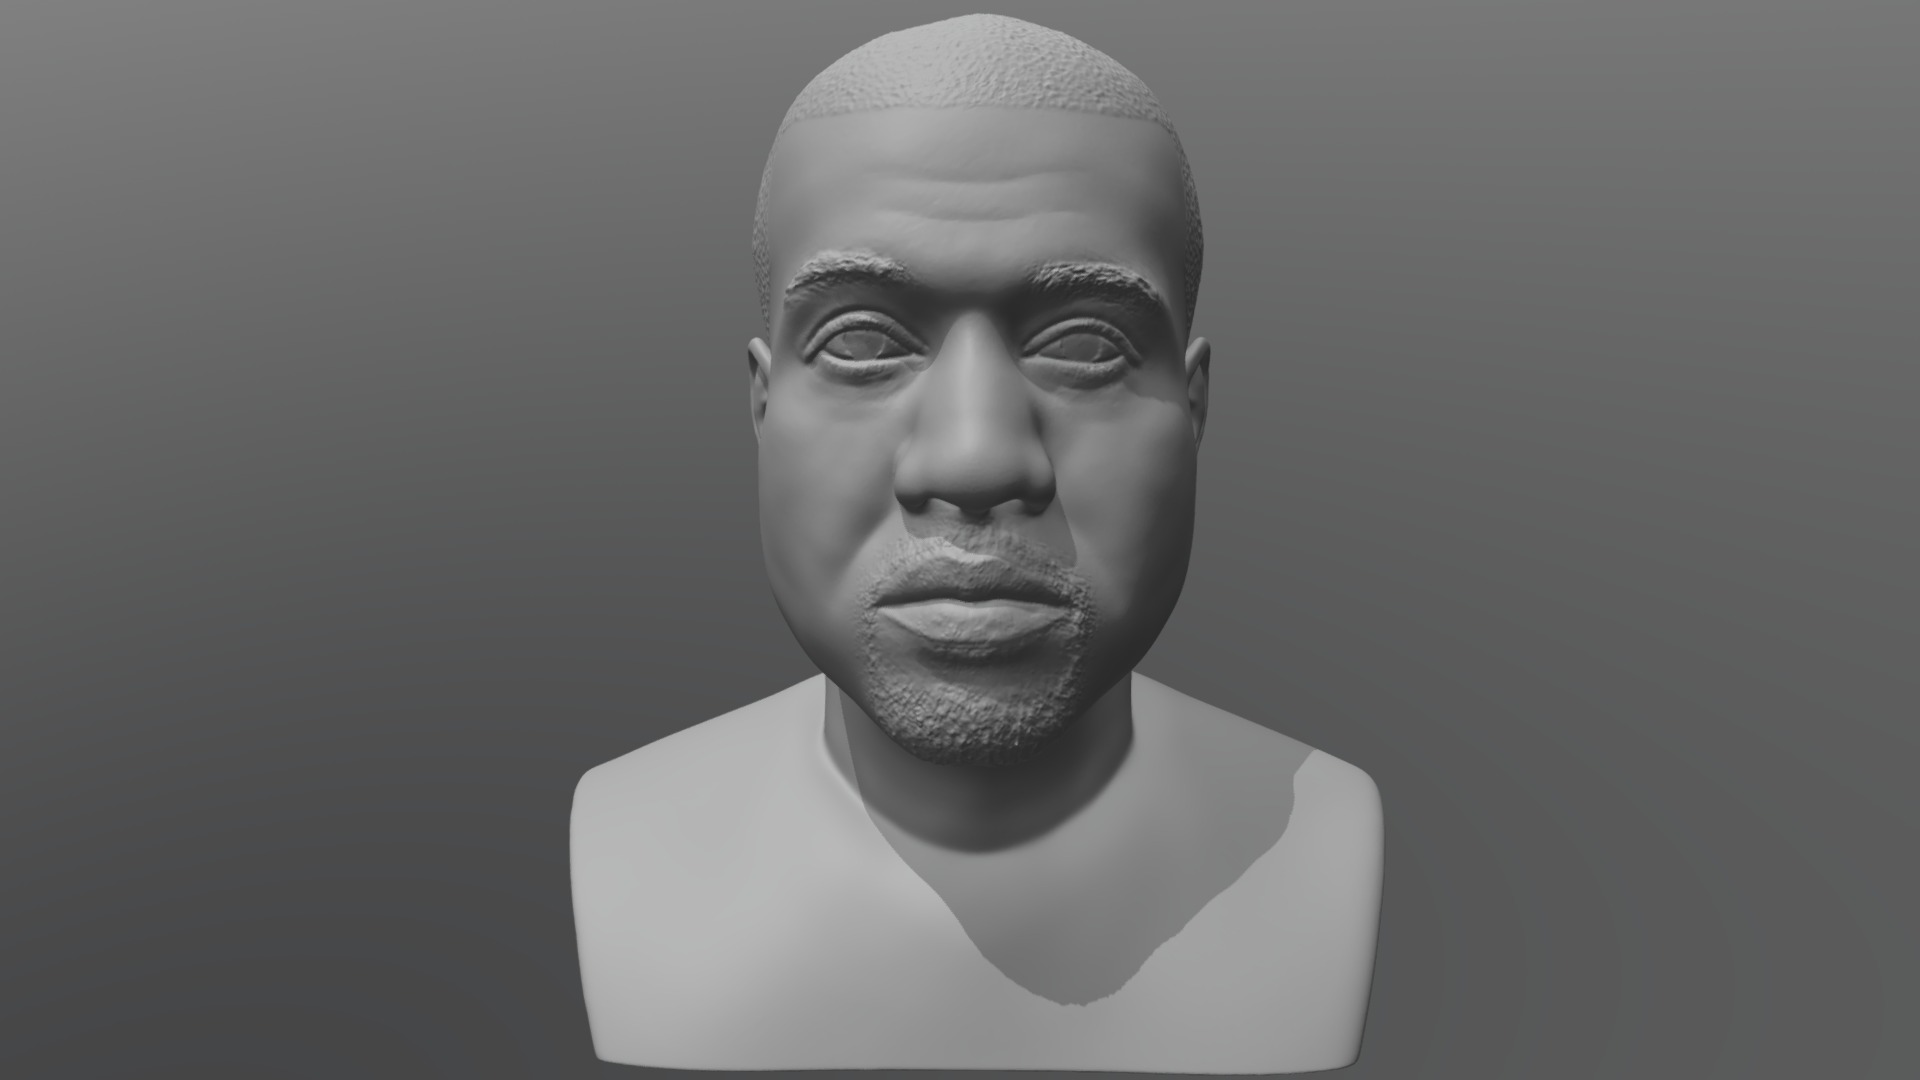 3D model Kanye West bust for 3D printing - This is a 3D model of the Kanye West bust for 3D printing. The 3D model is about a man with a white headdress.